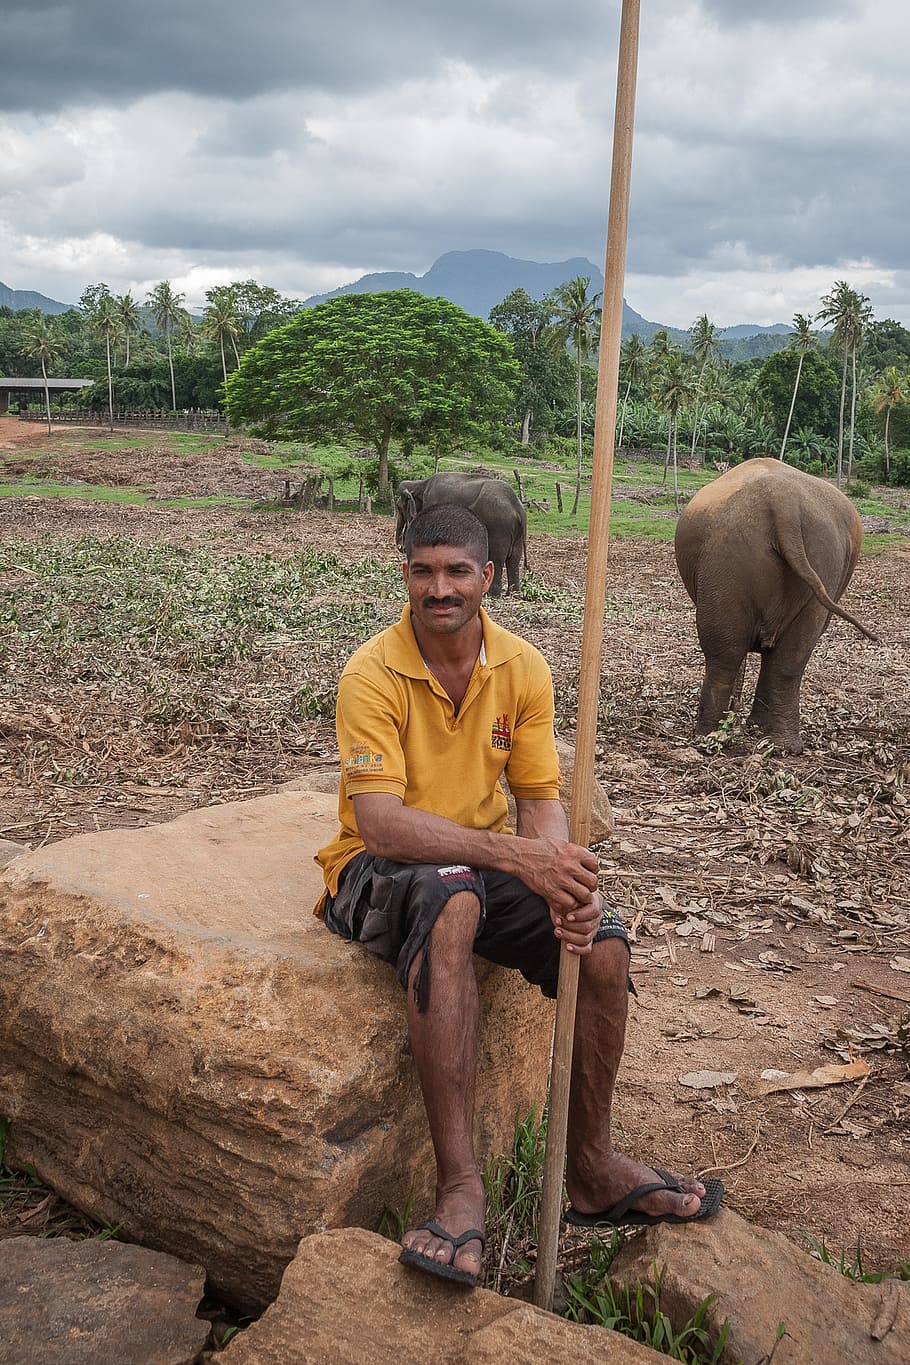 caregiver, elephant, animal, one person, real people, men, front view, full length, sitting, adult